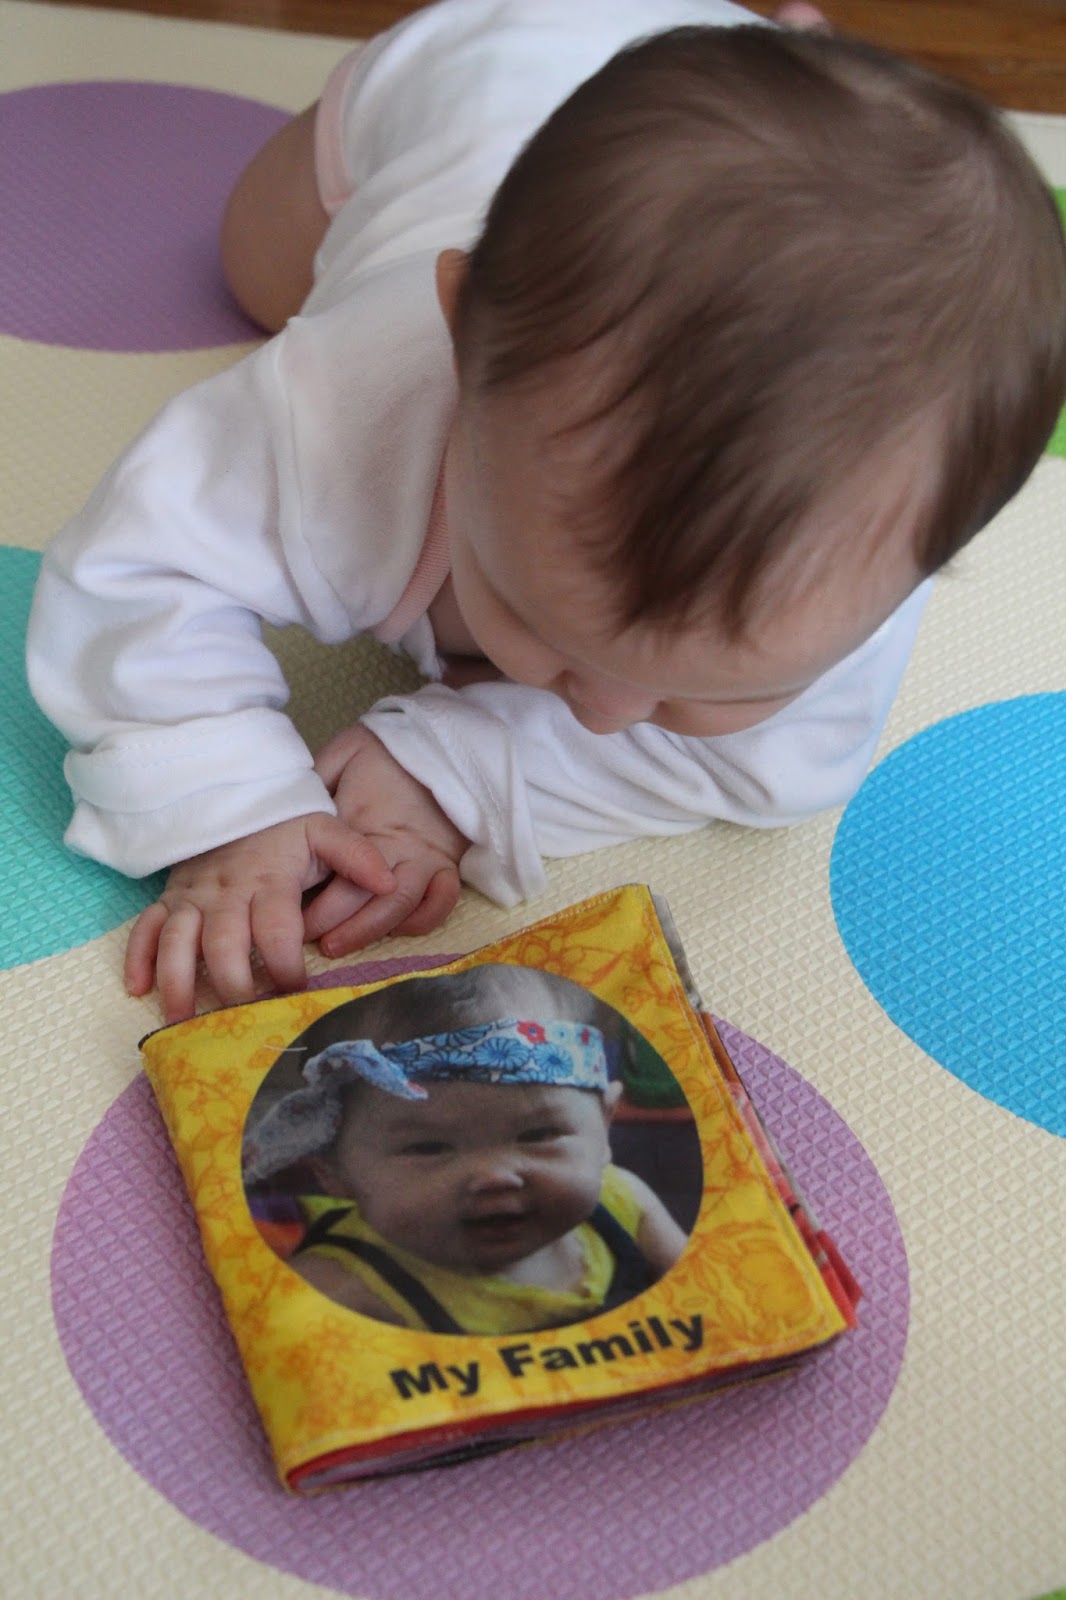 How To Make Plush Baby Photo Book Online